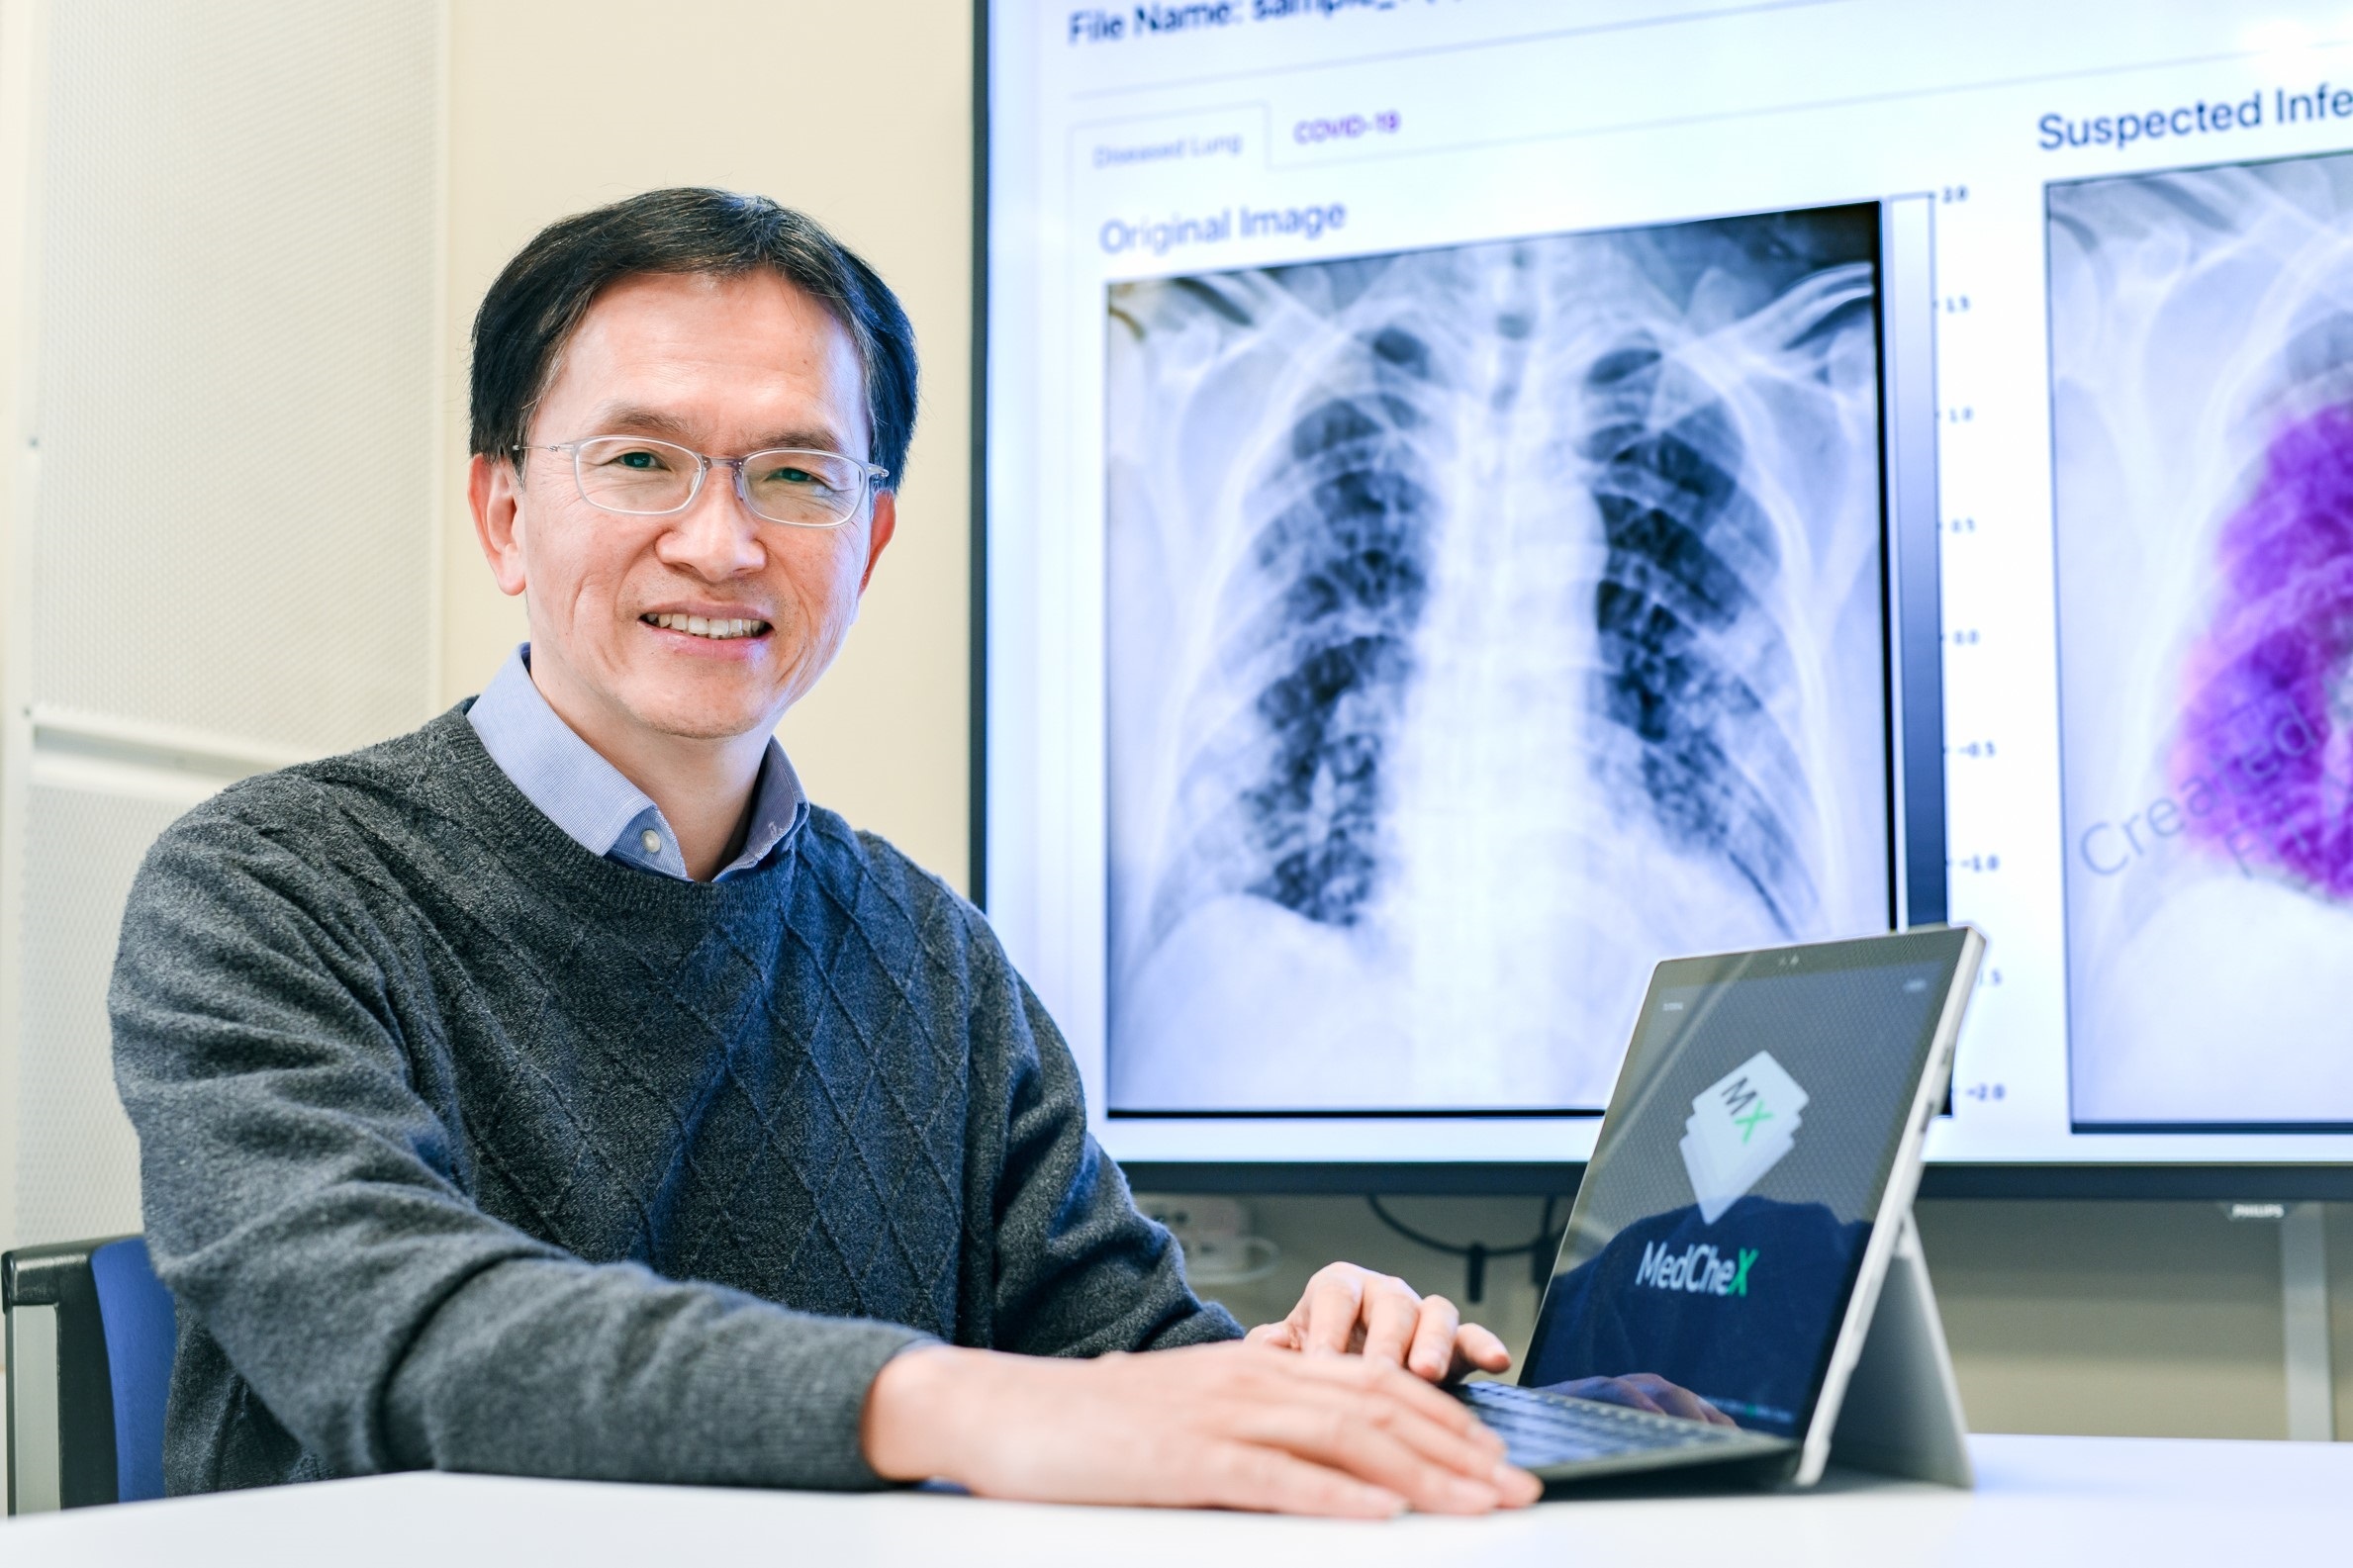 MedCheX developed by Jung-Hsien Chiang’s team is able to detect possible COVID-19 infections in chest X-rays with AI model